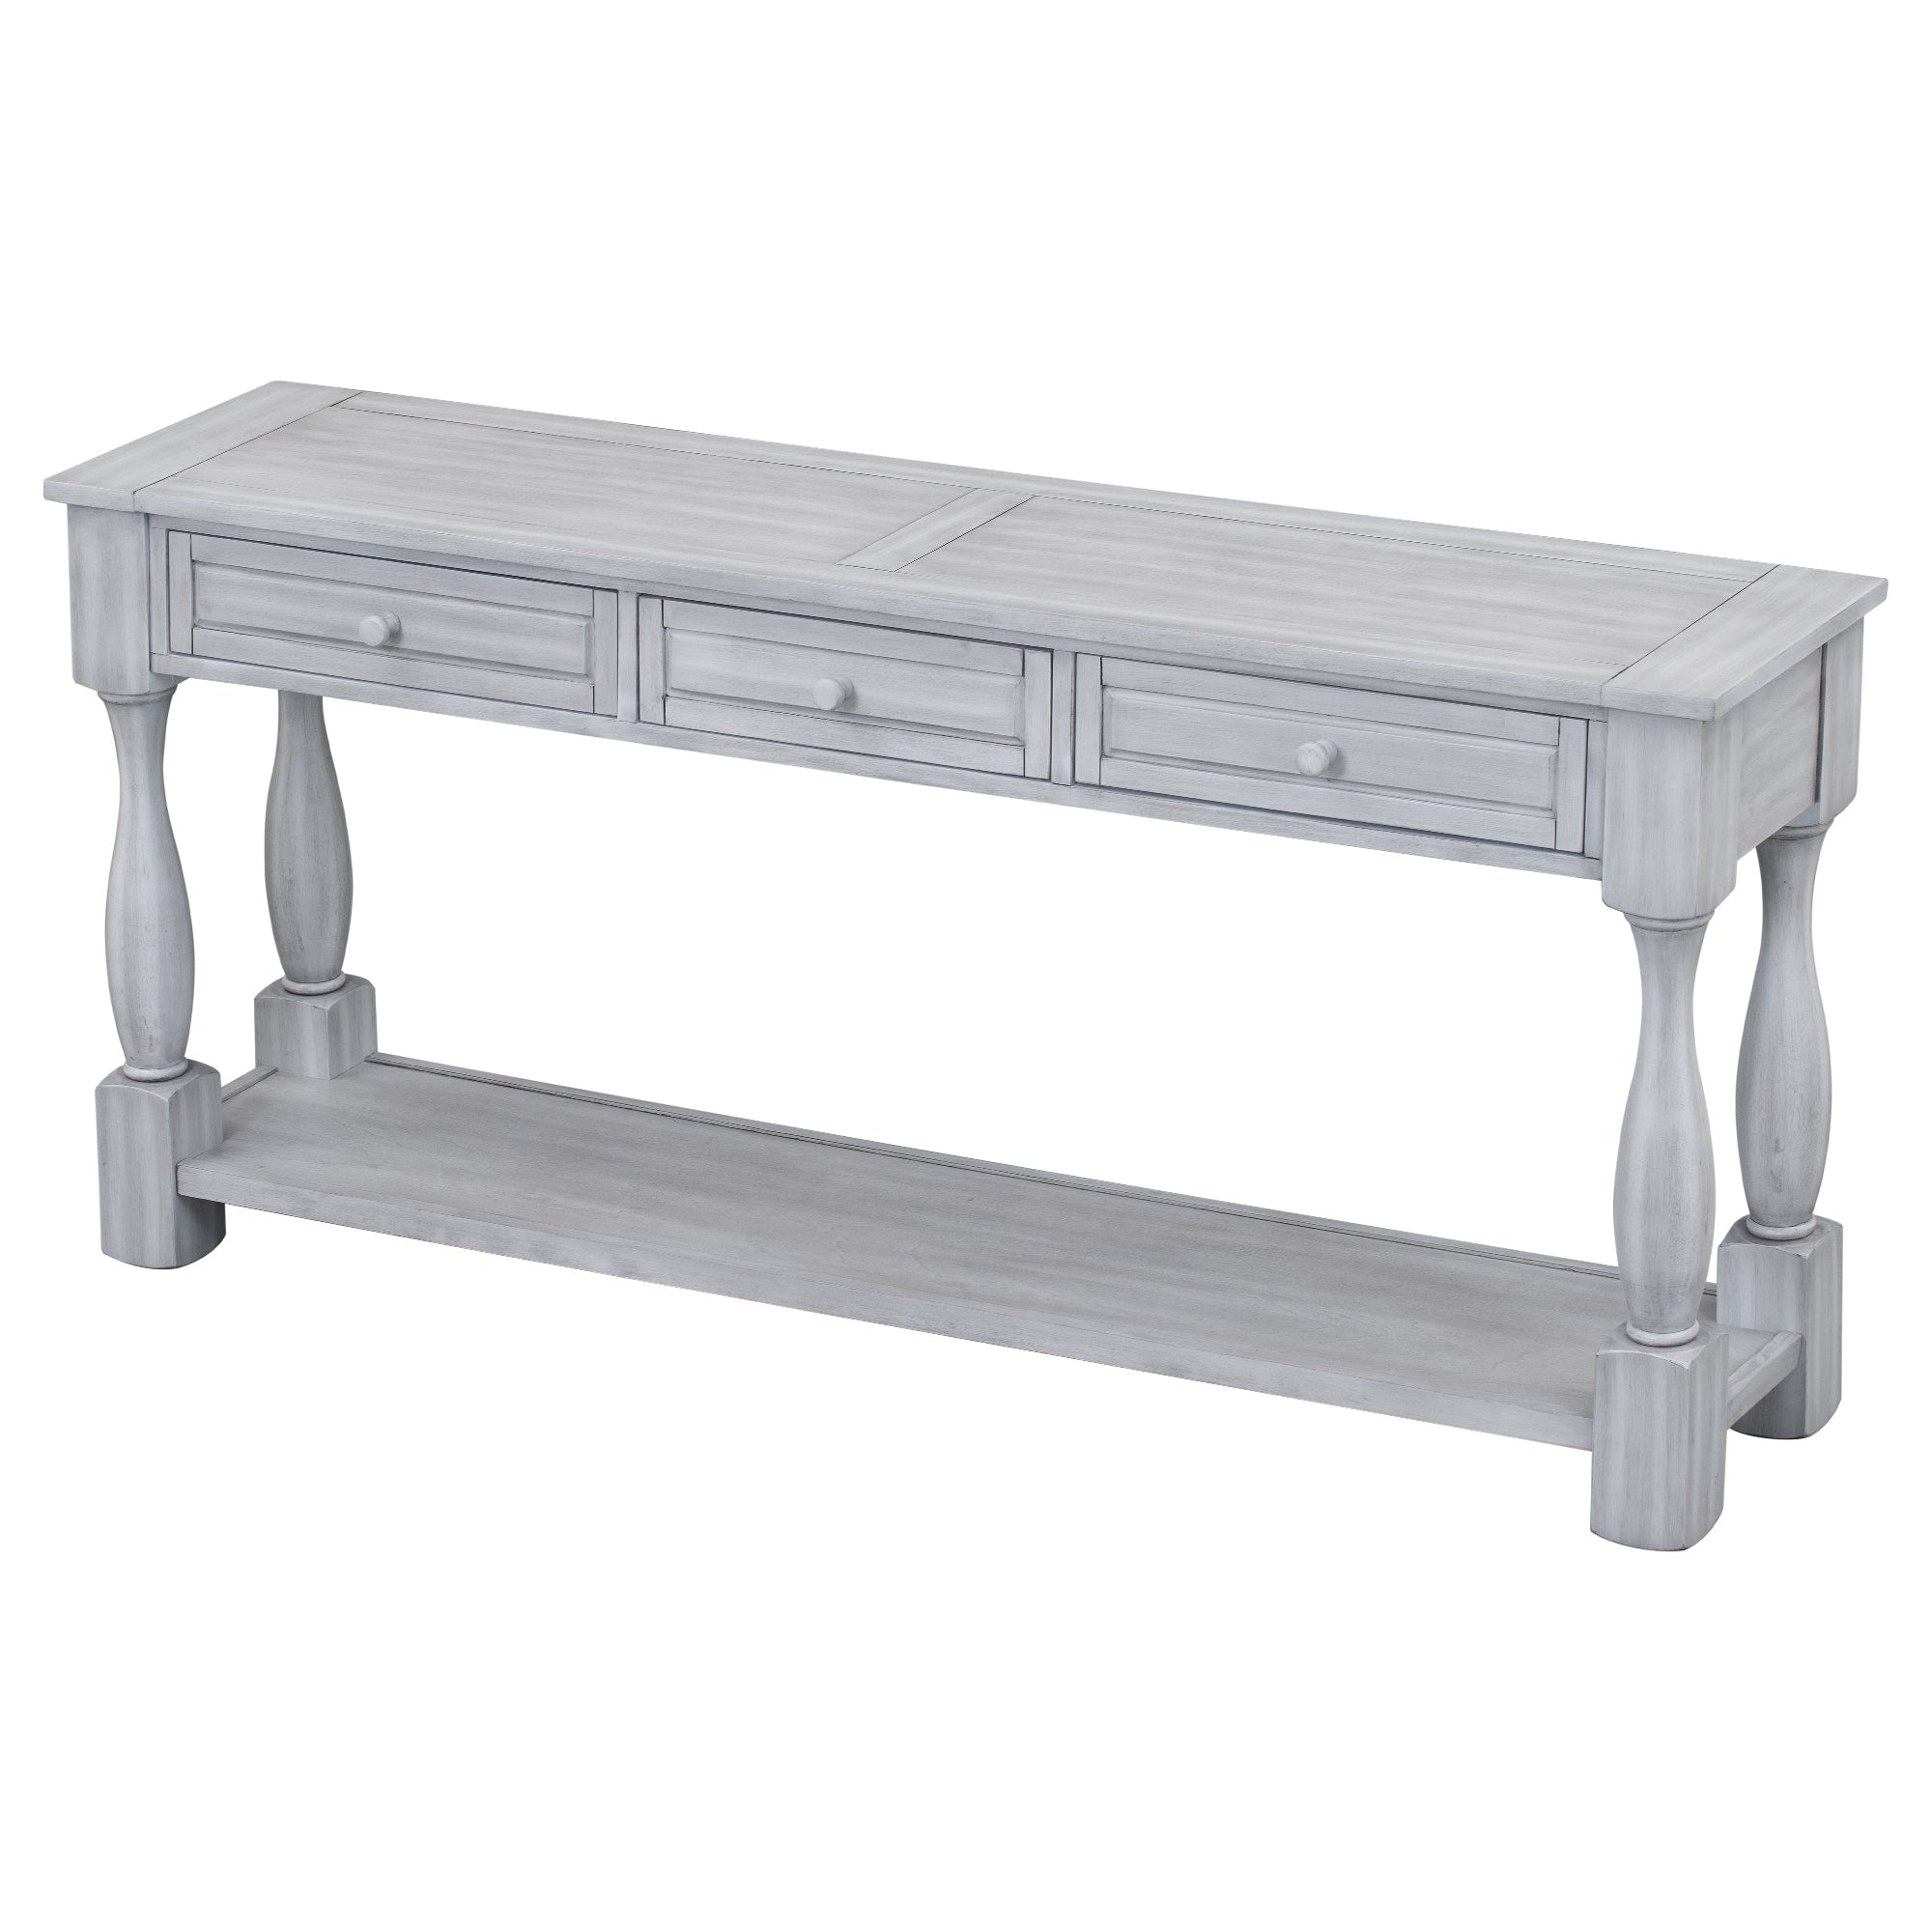 64" Console Entryway Table, Sideboard, Light Gray Color